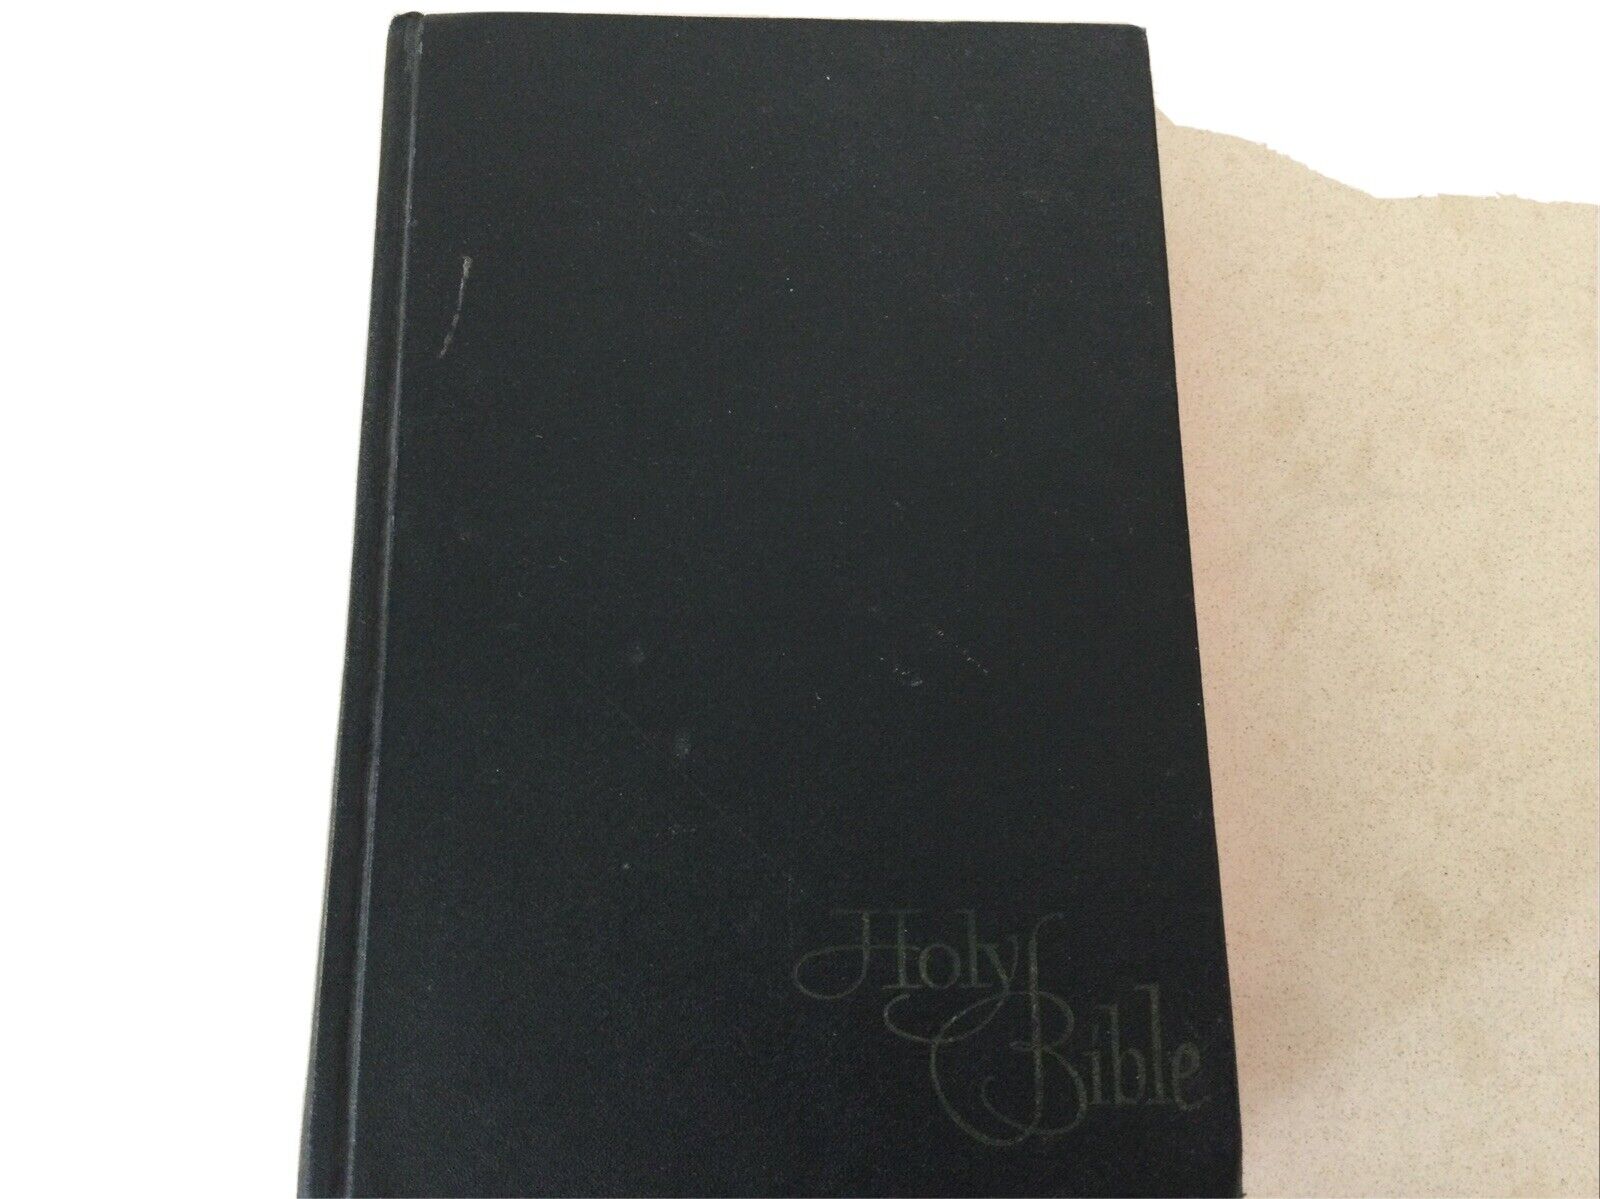 The Holy Bible. 1960’s